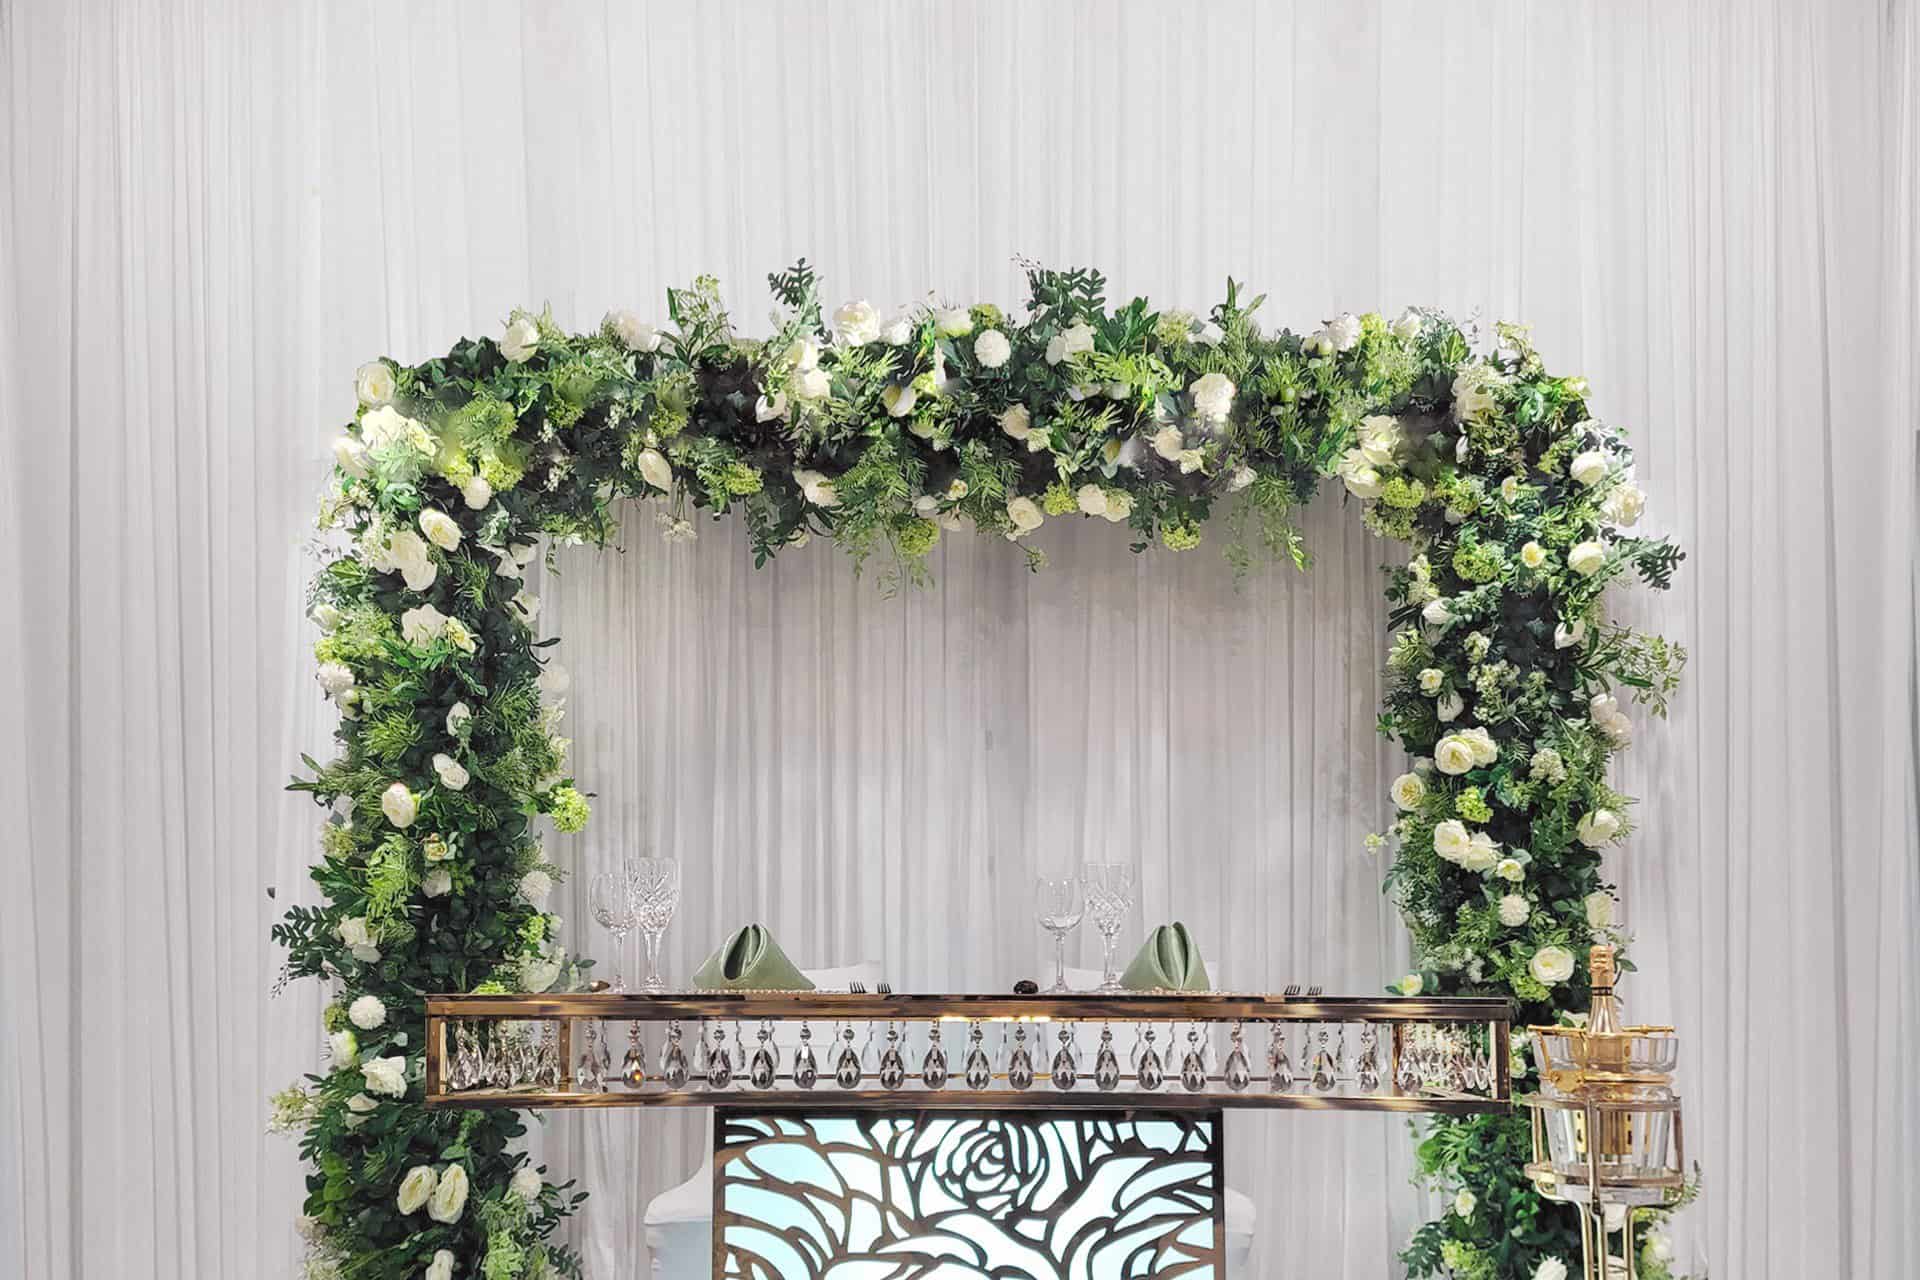 Flower Arch Backdrop is a Stand that Helps Frame Photos... Rent + DIY